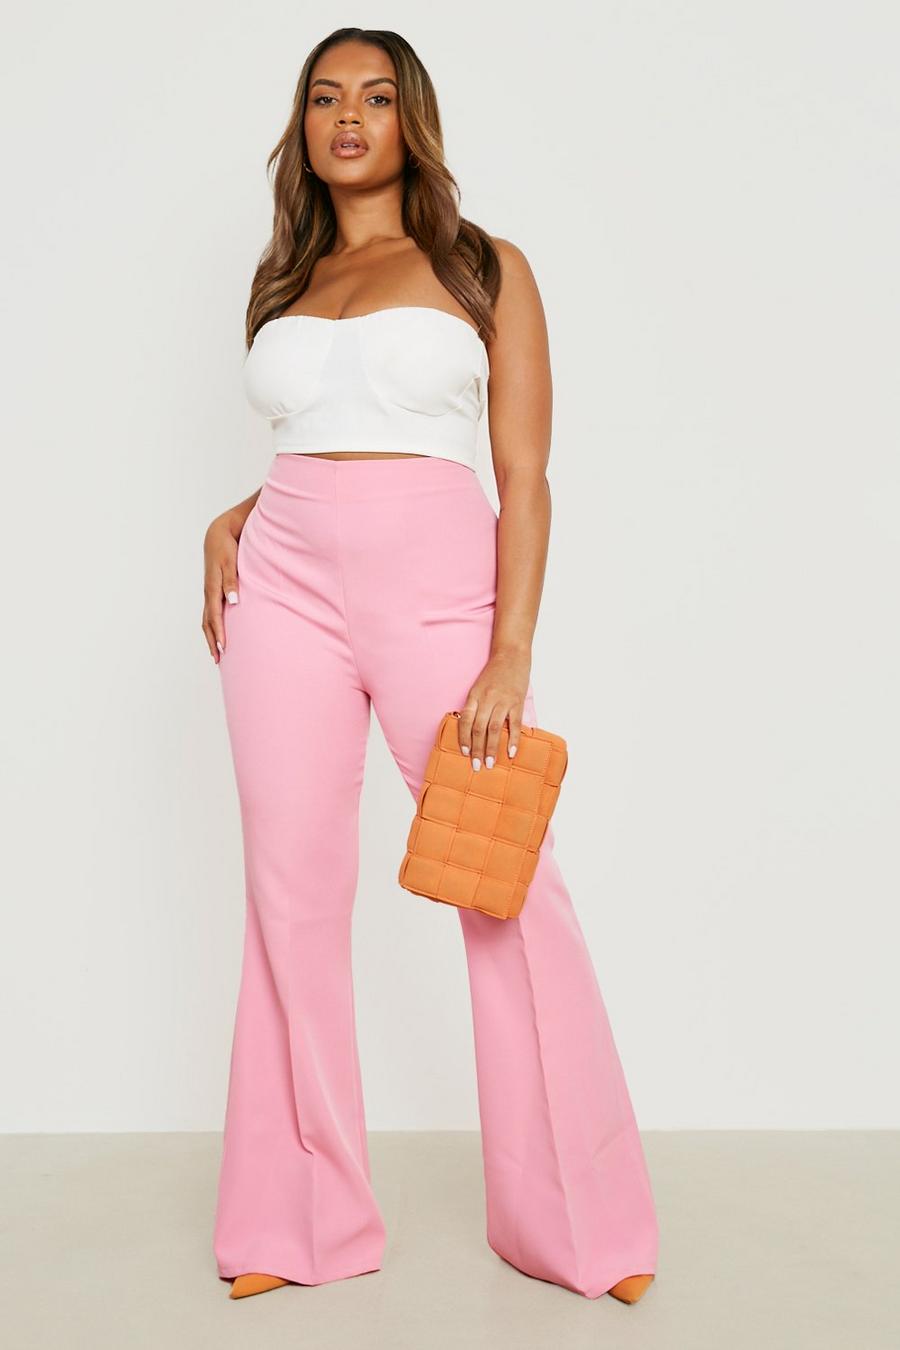 Candy pink Plus Woven Flare Dress Pants